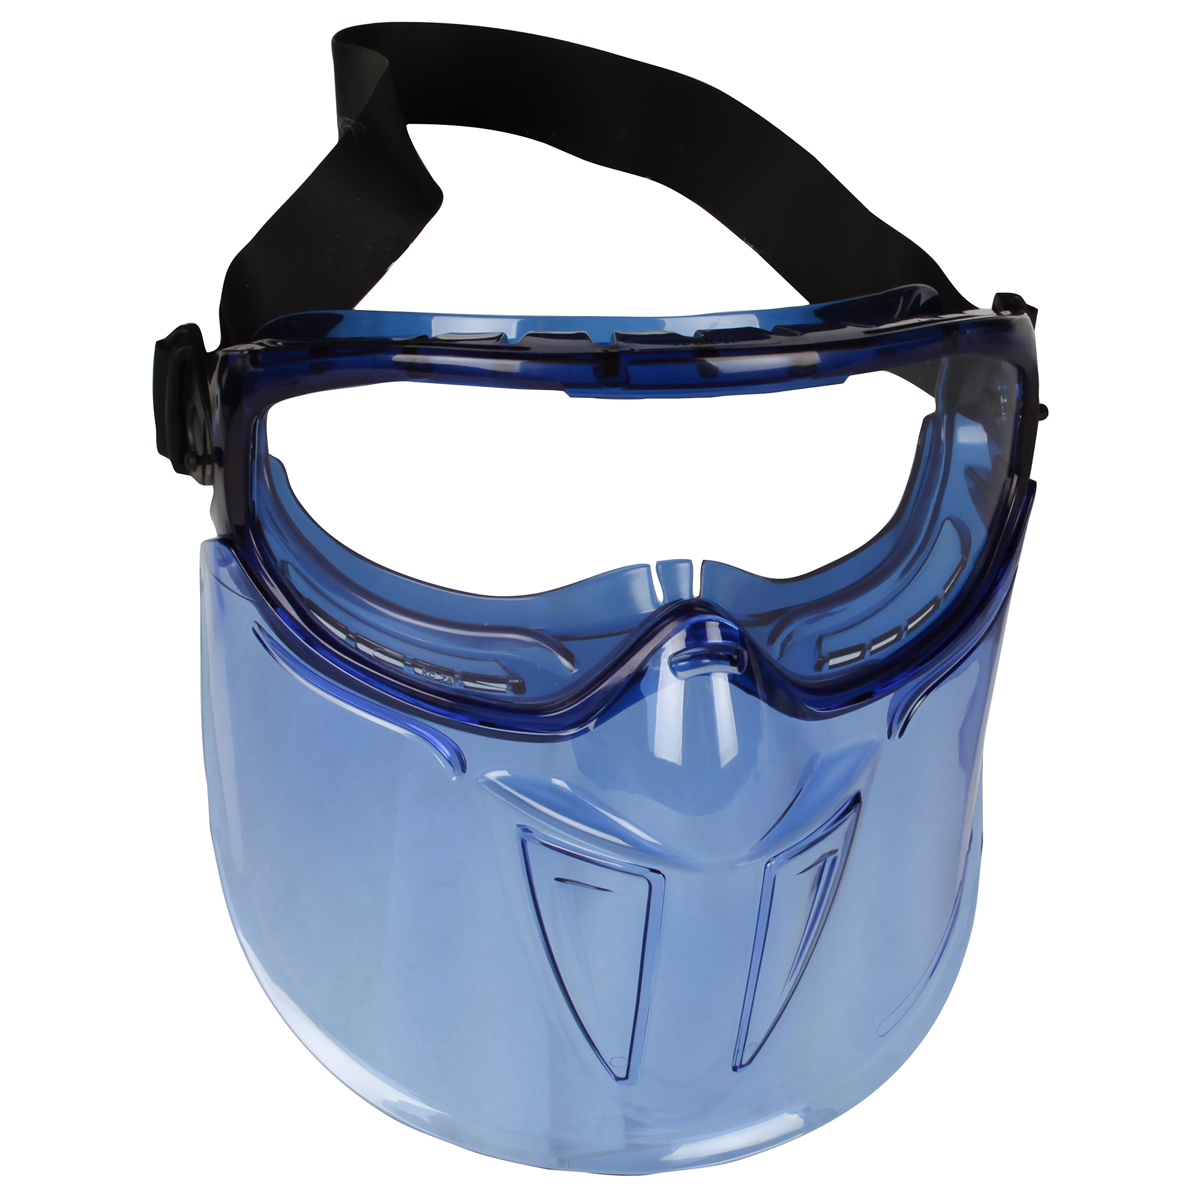 Airgas - Anti-Fog Shield Clear XTR Kimberly-Clark Frame - Goggles Splash Monogoggle™ With KleenGuard™ And Lens Blue Professional K4518629